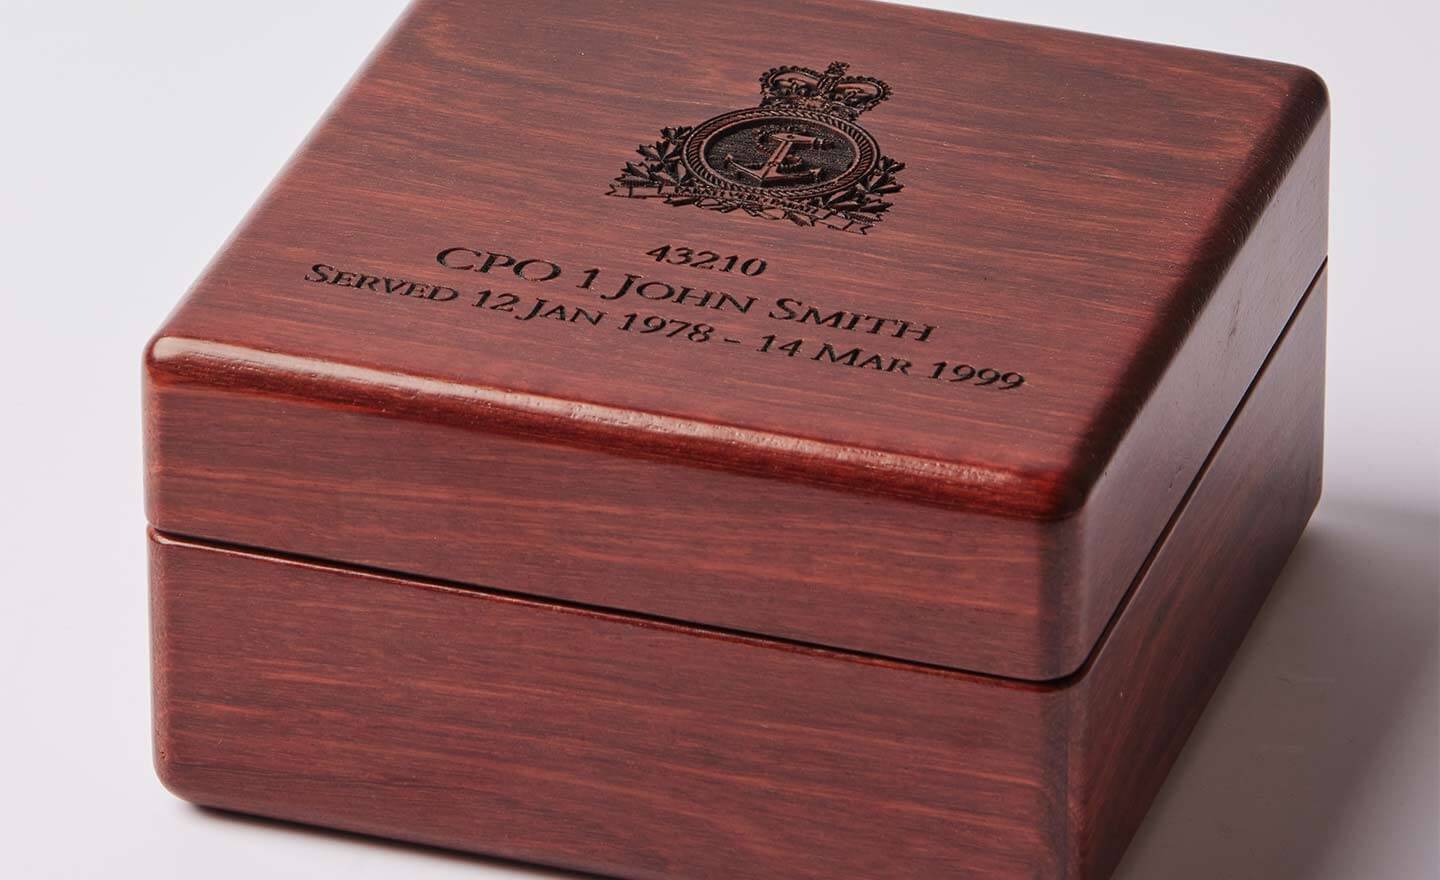 Beautiful, wooden medal display case engraved with canadian military emblem for veterans to store medals in.